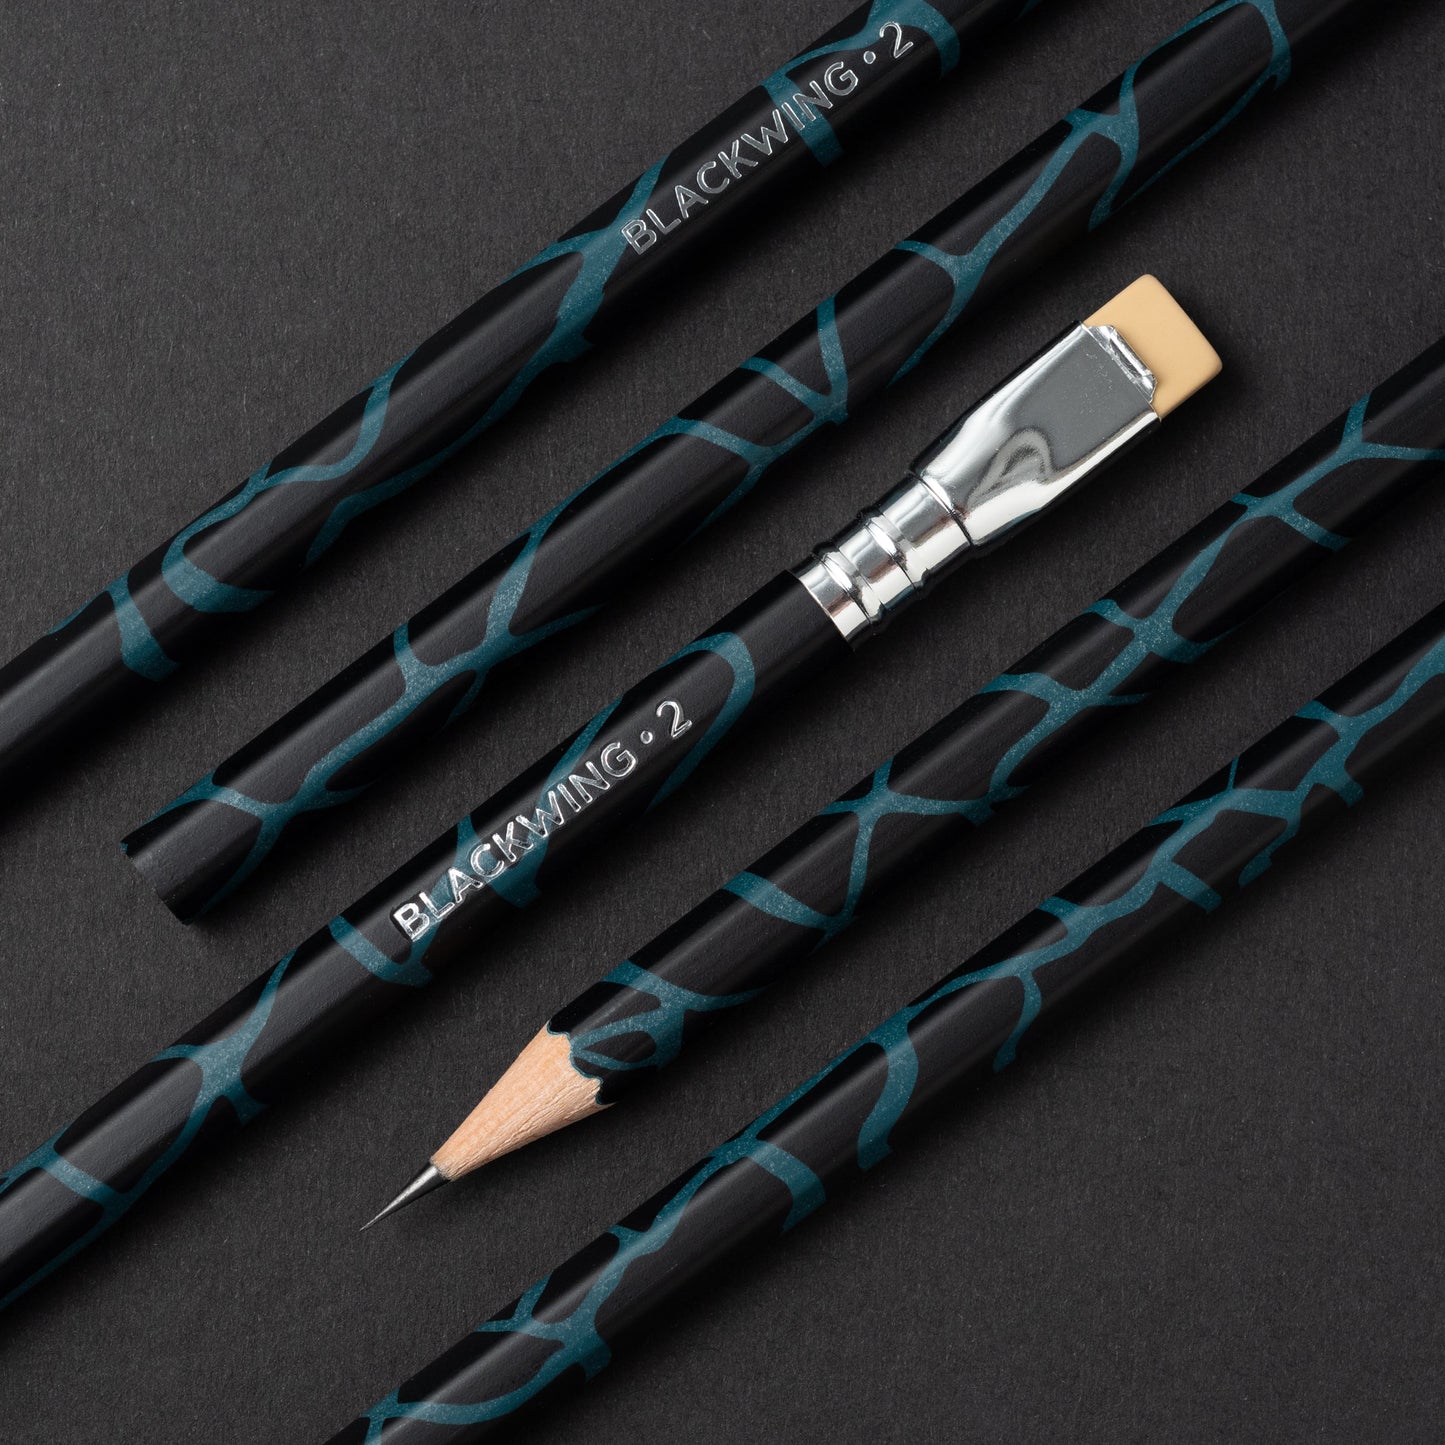 Blackwing Volume 2 (2x Firm - Set of 12)